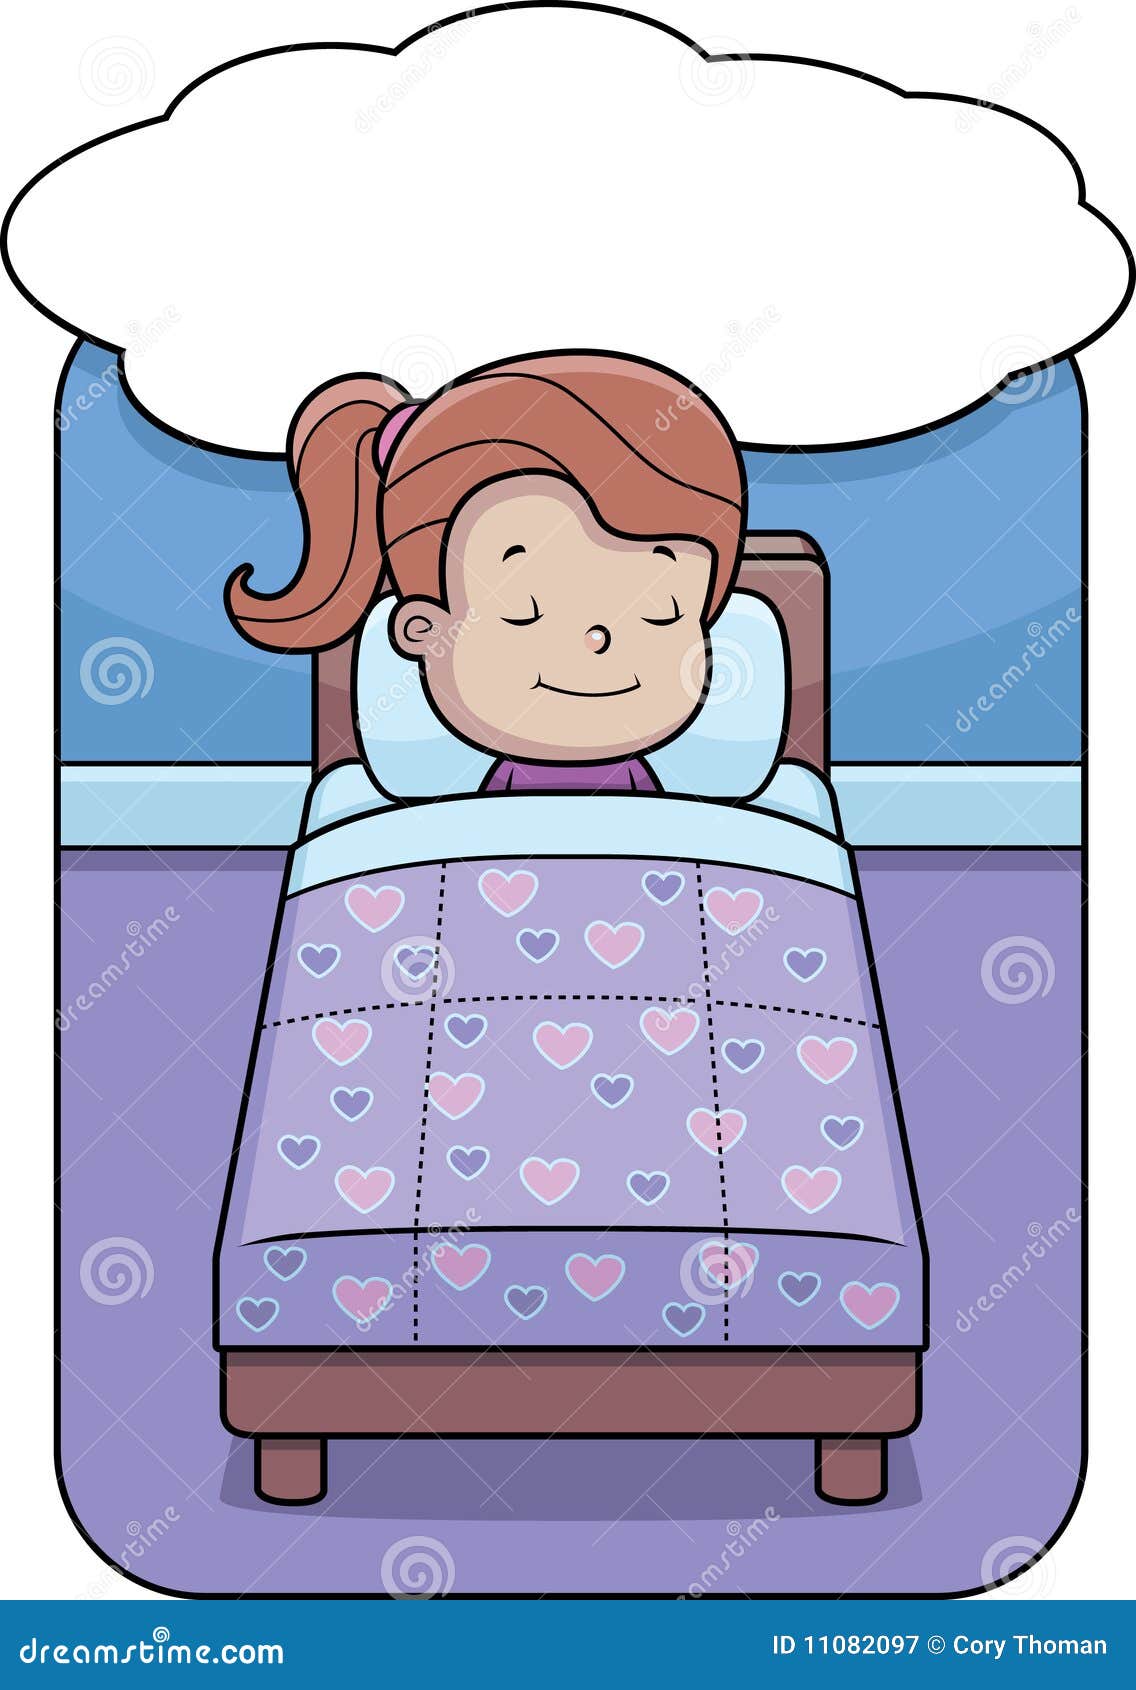 girl dreaming clipart - photo #39